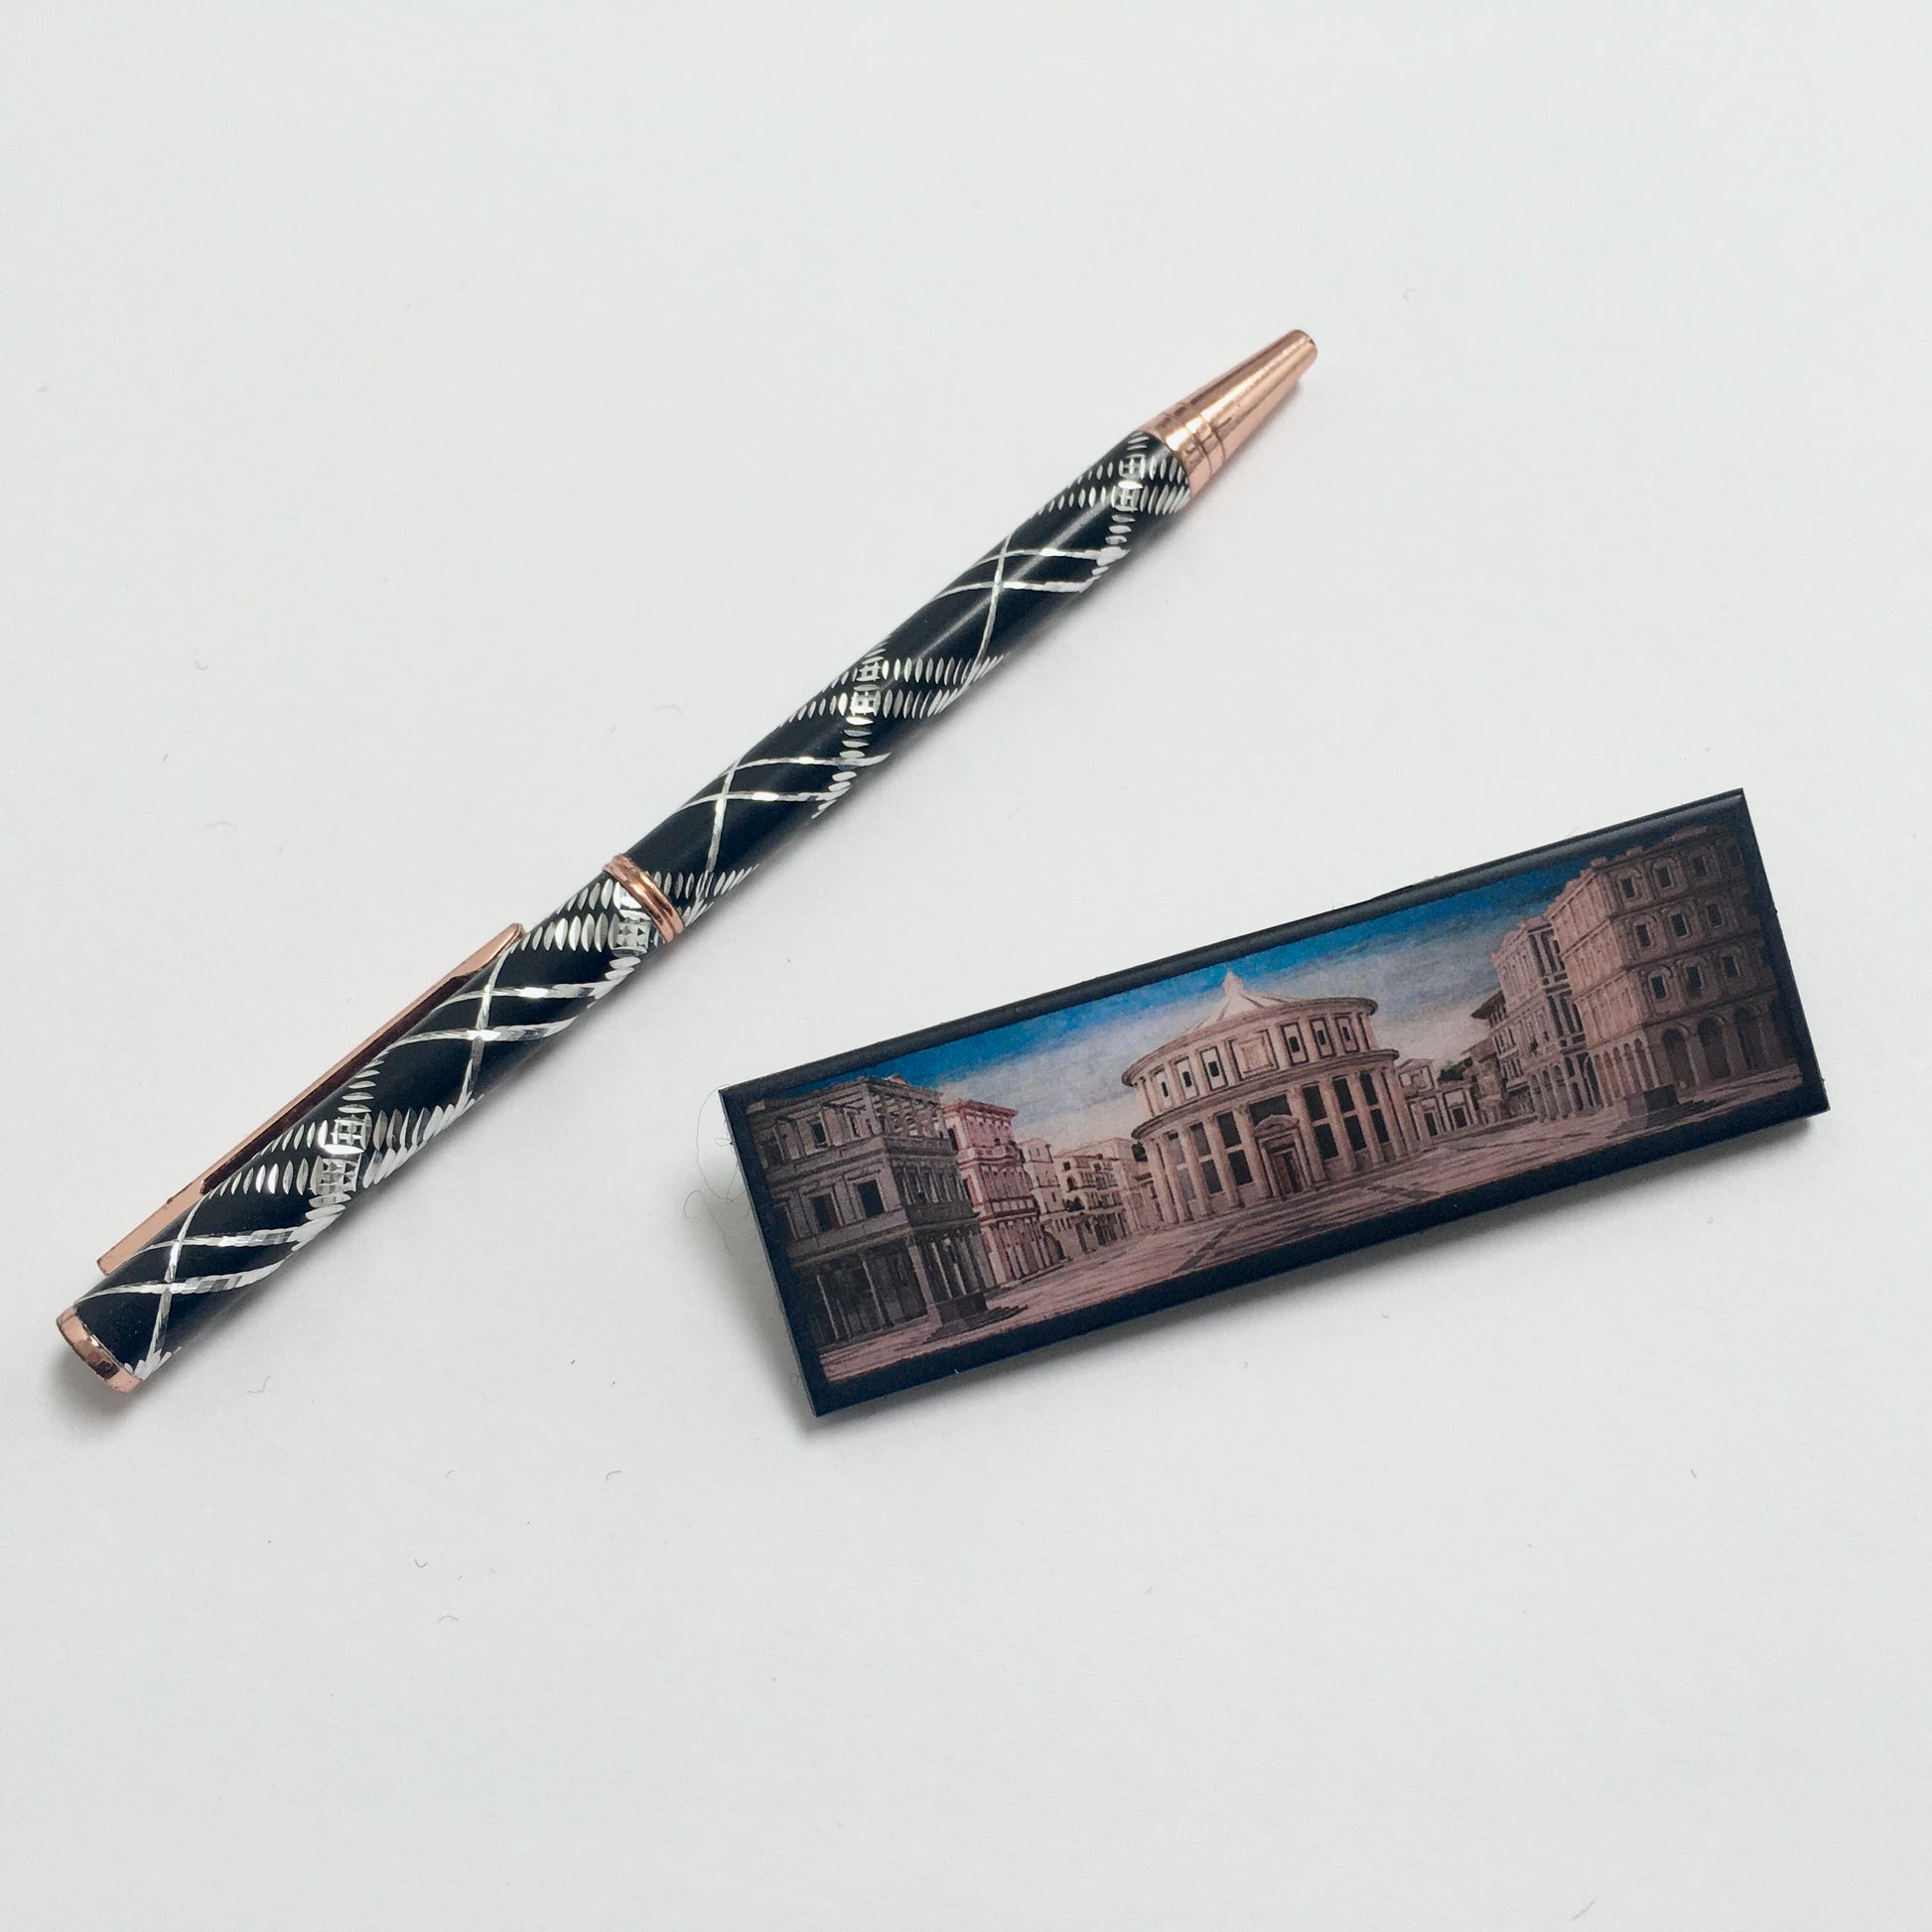 The Ideal City of Urbino art painting inspired Obljewellery to design this statement brooch handmade from sustainable wood. Aesthetic art brooch perfect artsy gift for her and him. The brooch is near a pen to see the propotions.